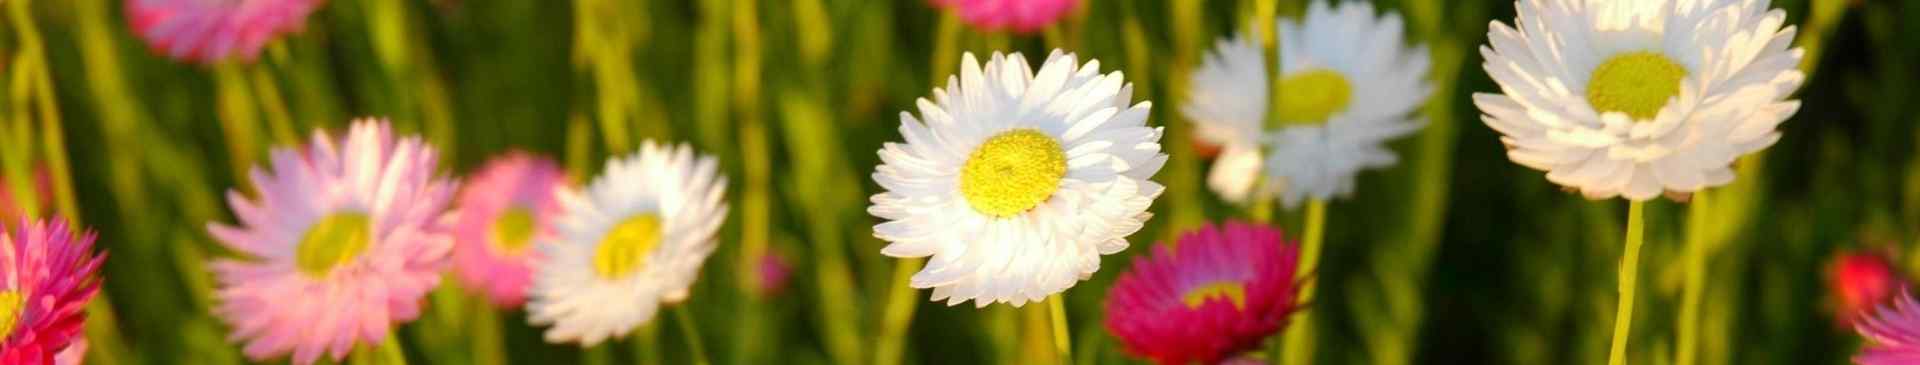 How to Grow Paper Daisy Seeds | The Seed Collection